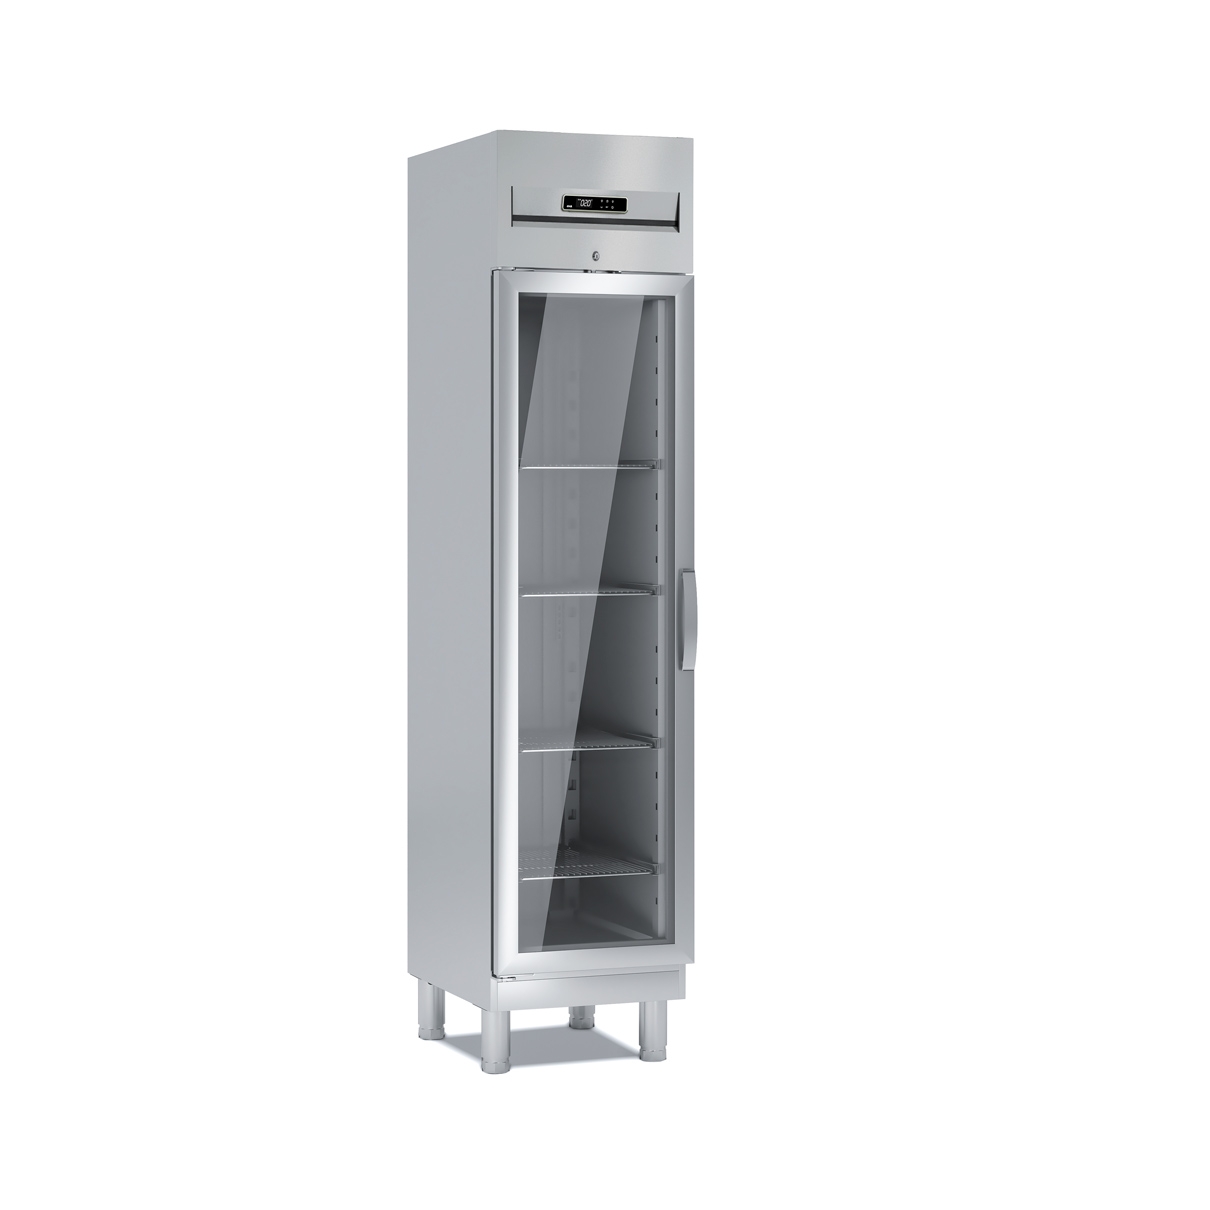 Gastronorm 1/1 Refrigerated Cabinet AG-50-E